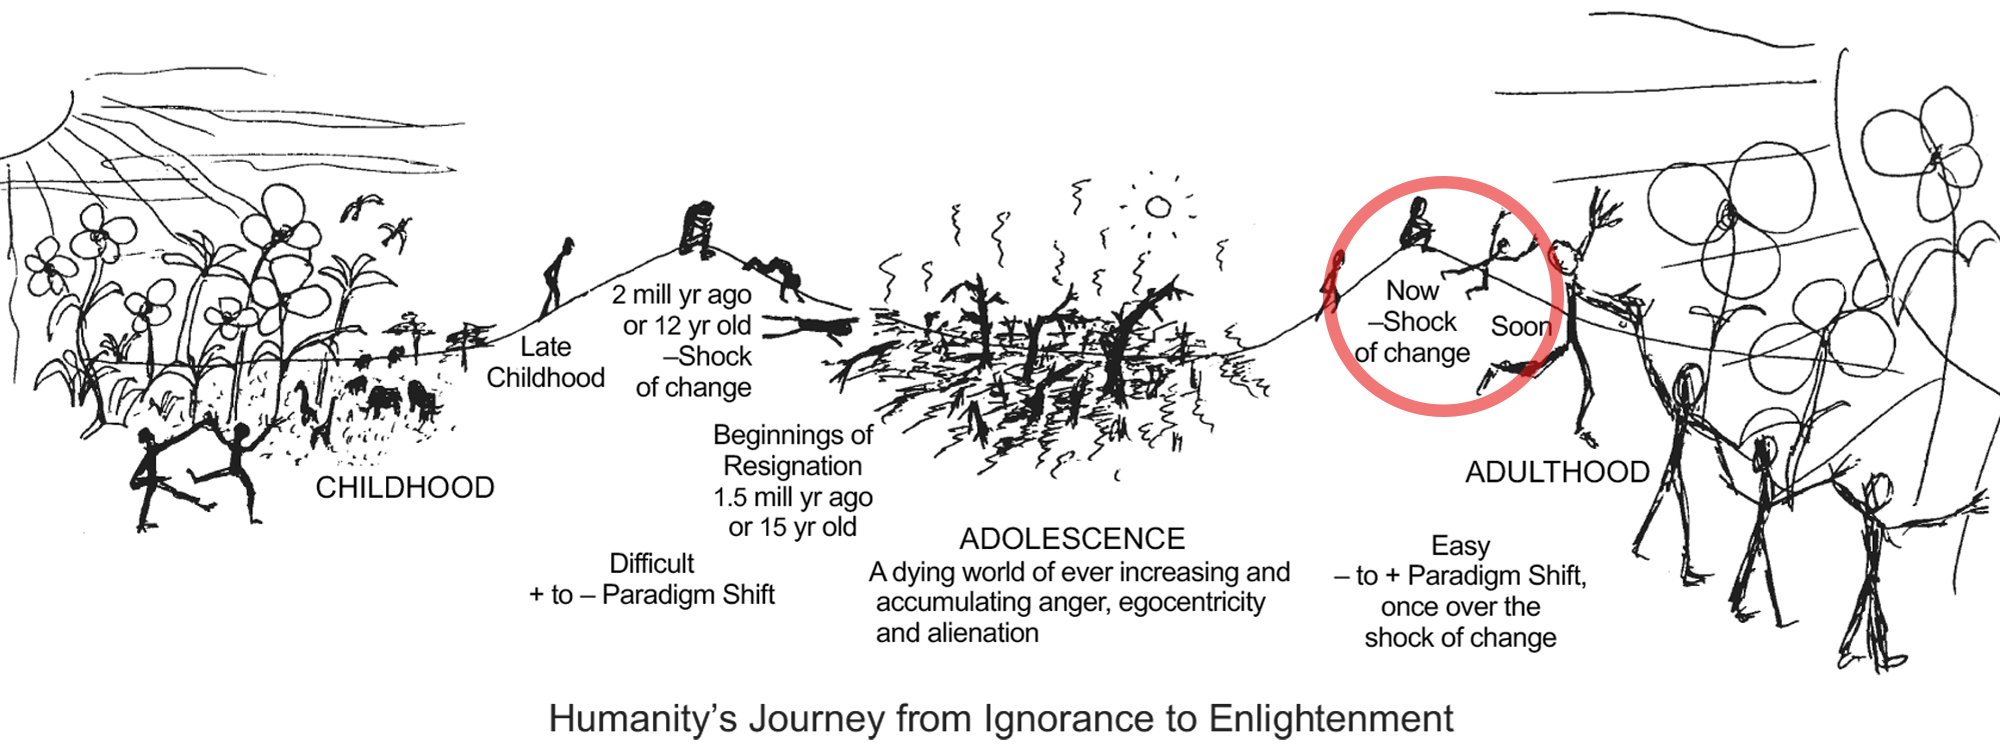 Humanity's Journey From Ignorance To Enlightenment